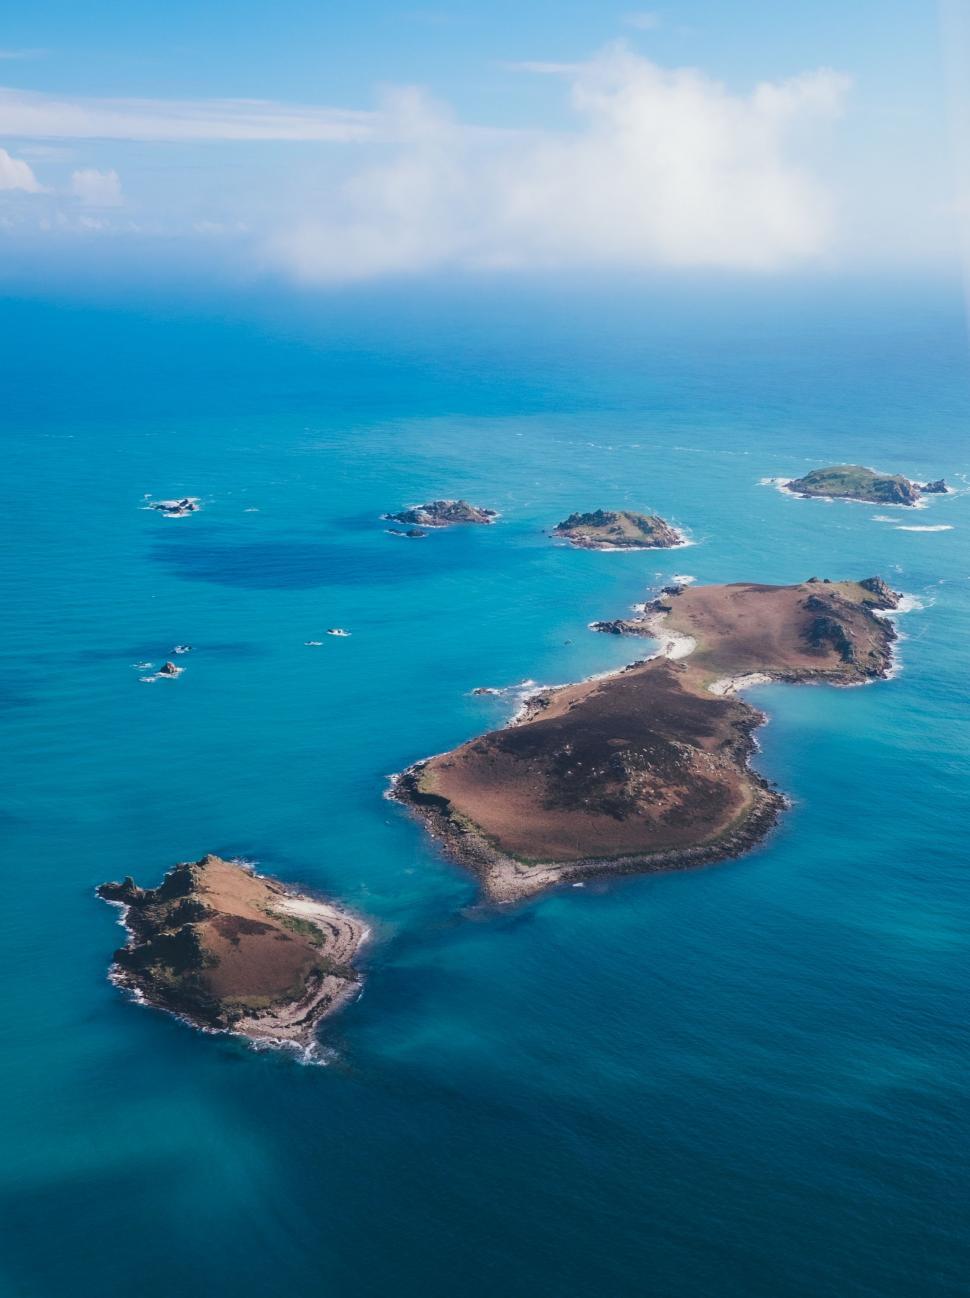 Free Image of Aerial View of Island in the Ocean 